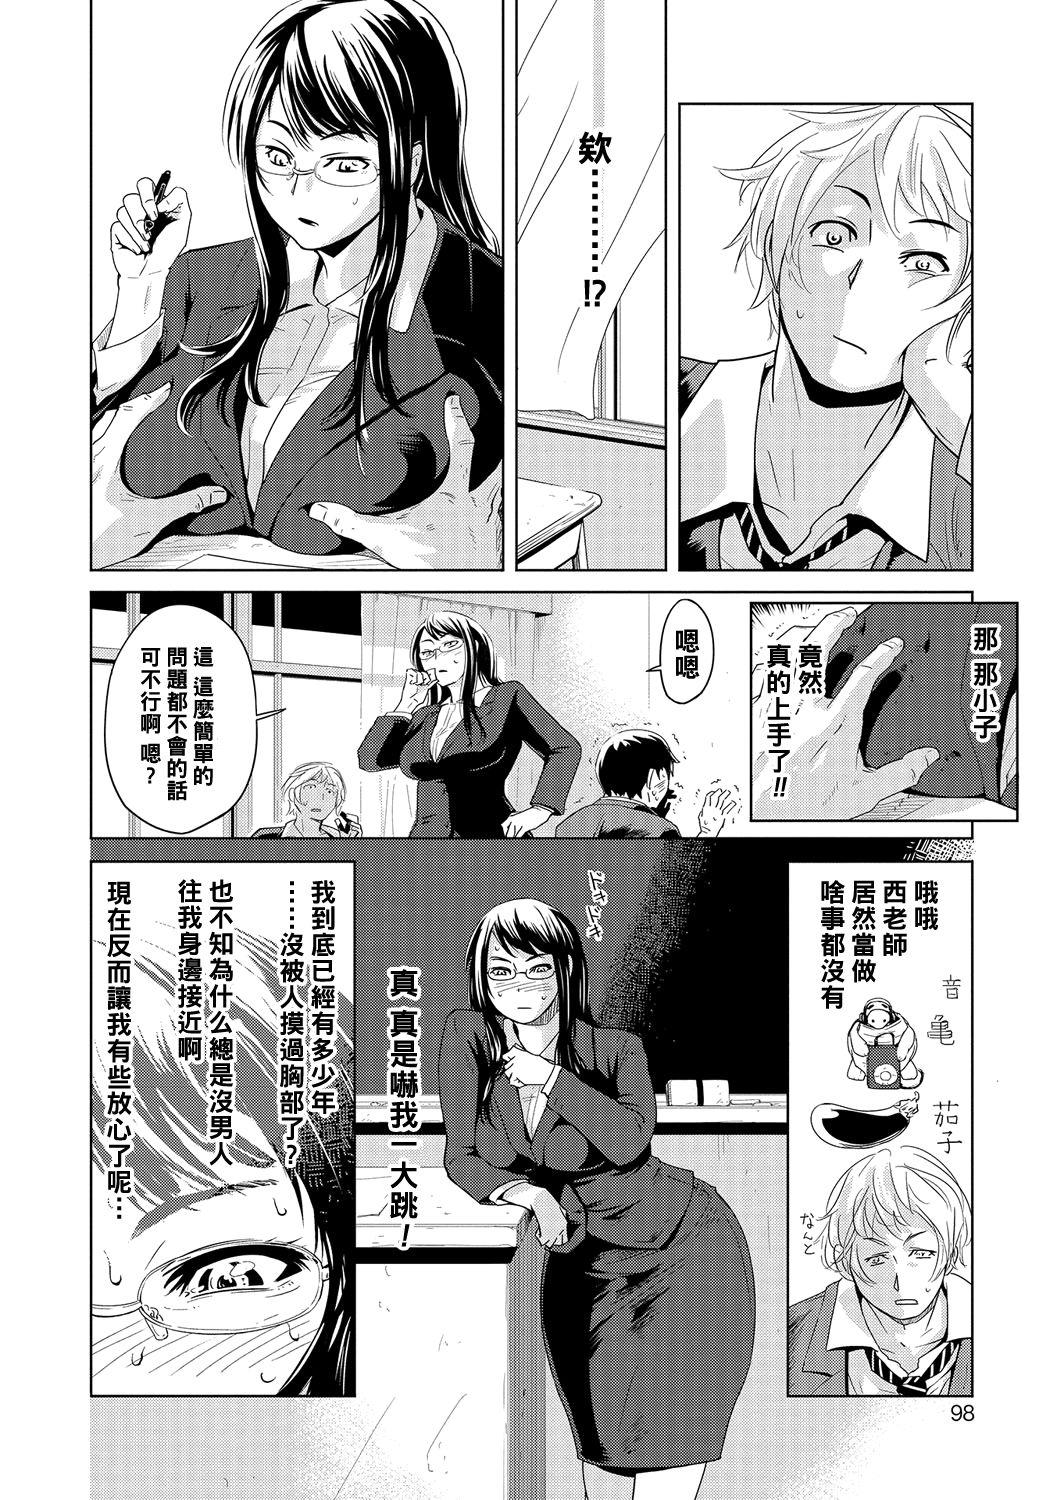 Boots 補習戦略～西彩子先生の場合～（Chinese） Scandal - Page 4